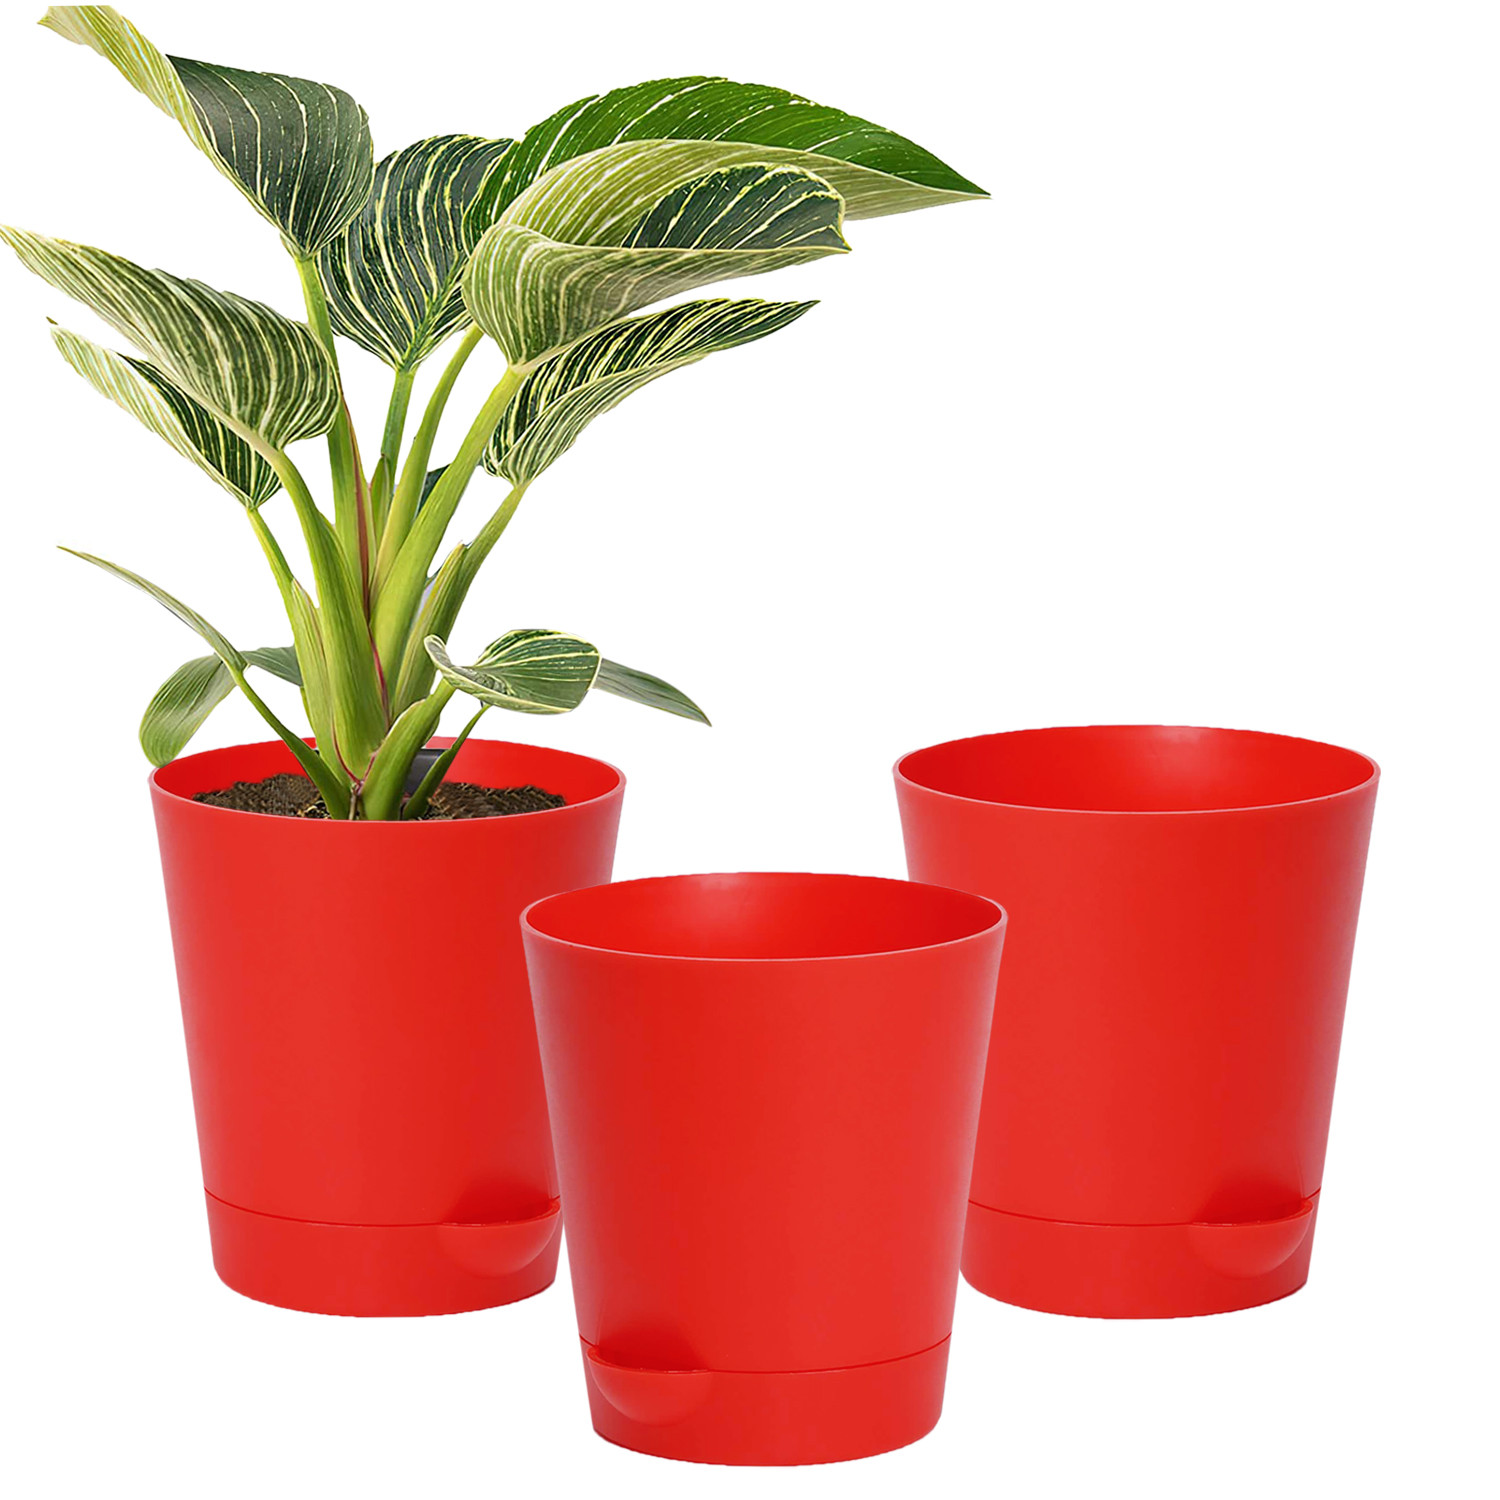 Kuber Industries Plastic Titan Pot|Garden Container For Plants & Flowers|Self-Watering Pot With Drainage Holes,6 Inch (Red)